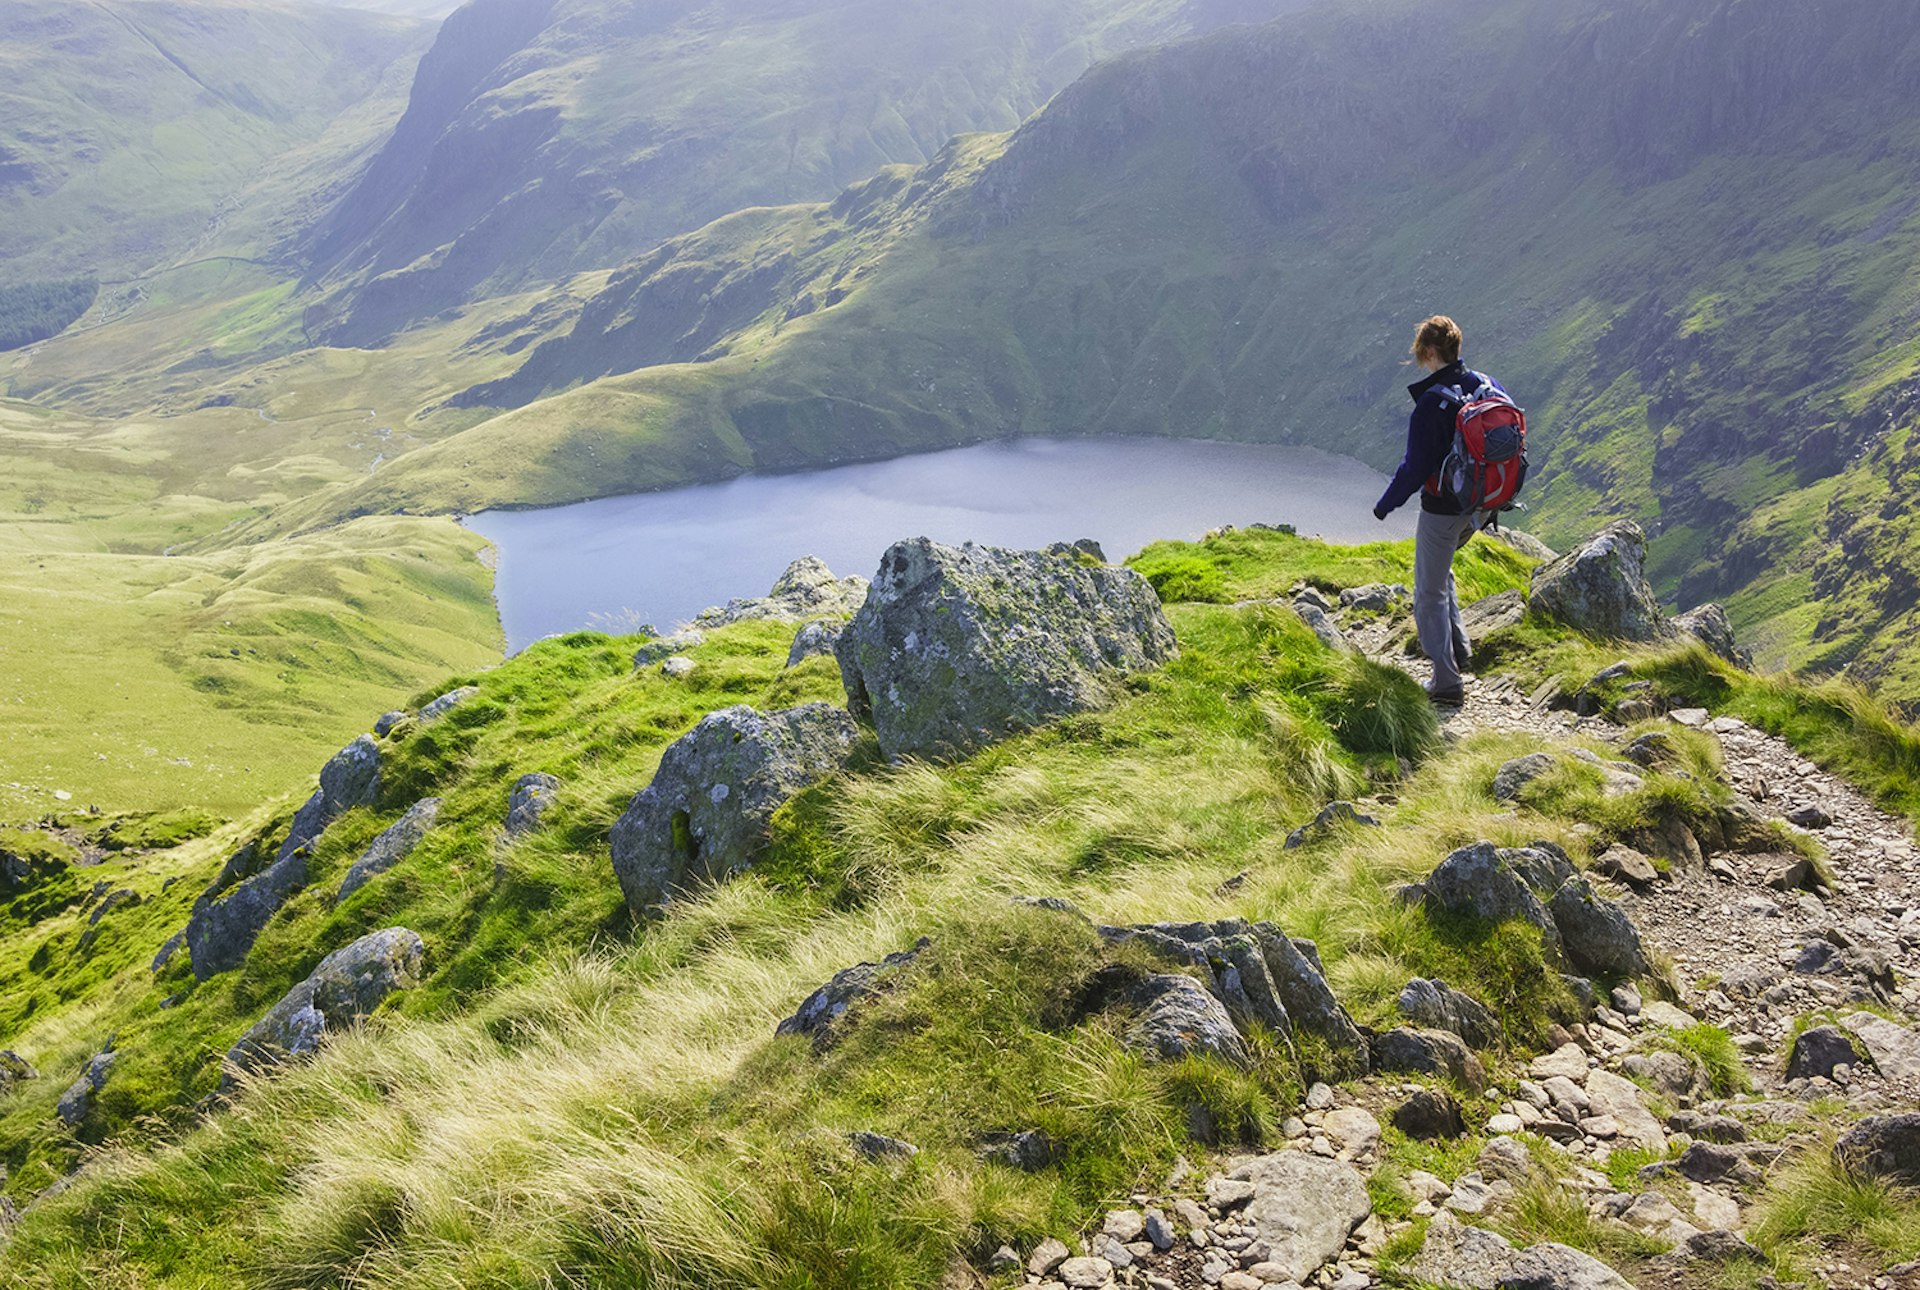 England's Lake District is hopelessly romantic. Unless it's raining. Image by Duncan Andison / age fotostock / Getty Images